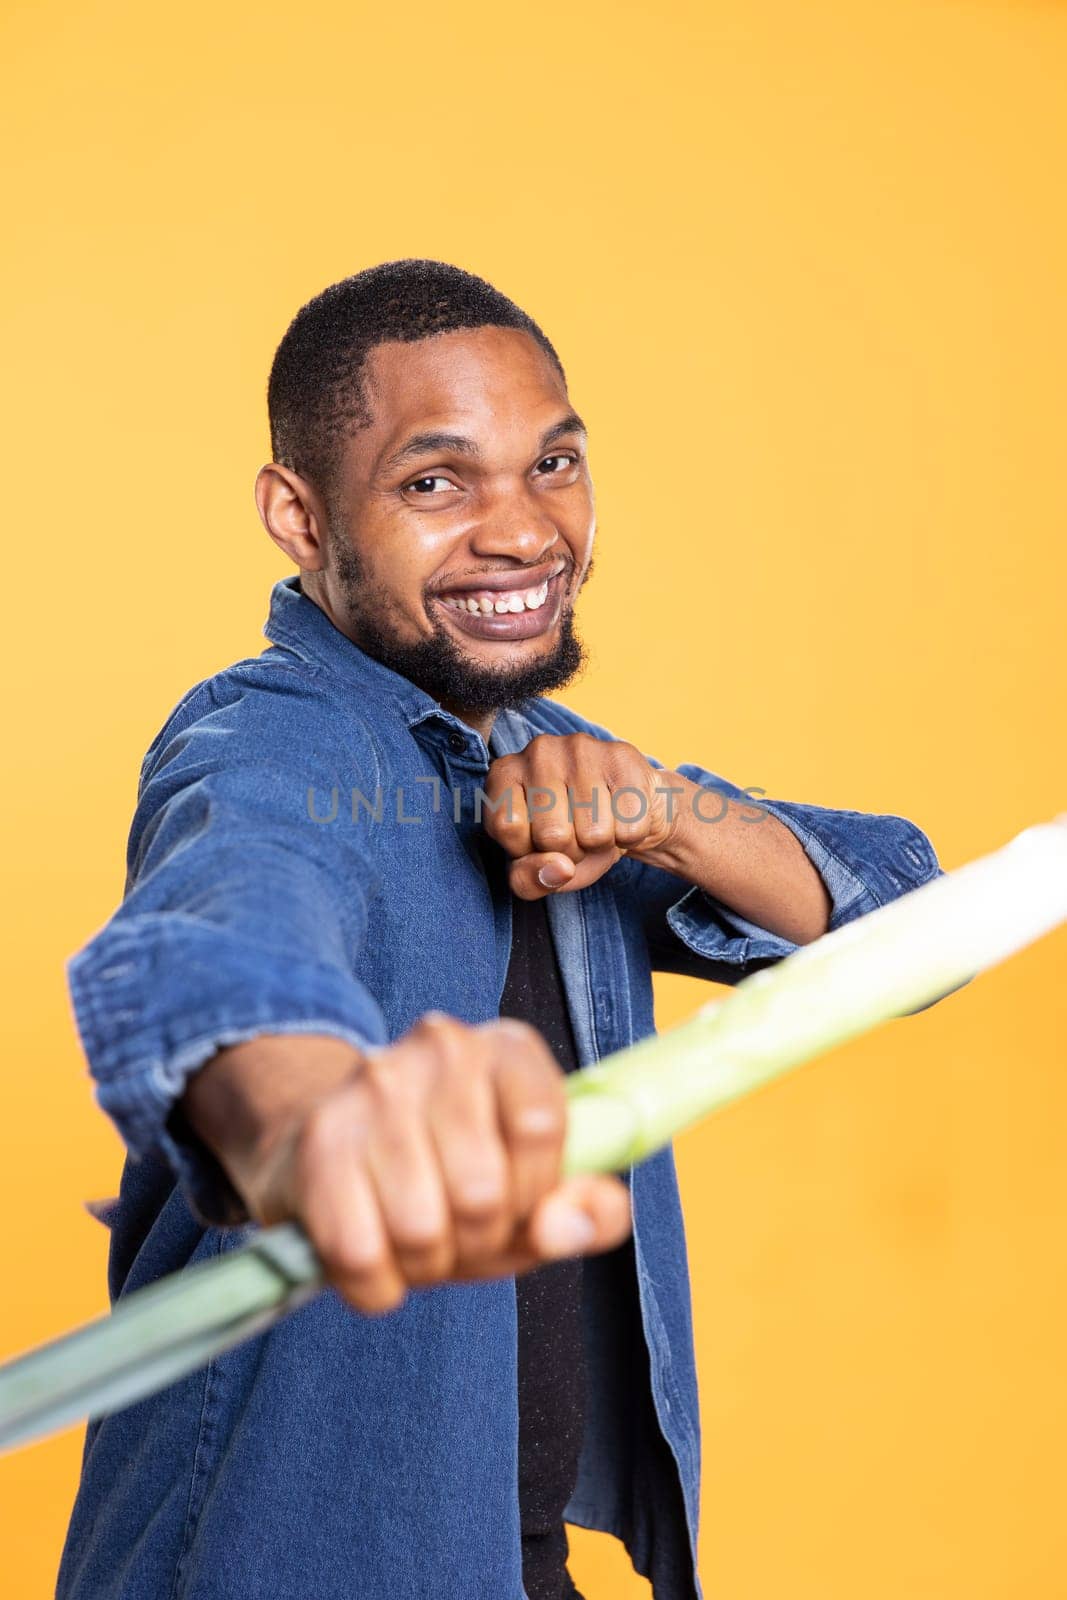 African american adult mimicking a combat move with a leek, holding produce as a sword against yellow background. Confident silly guy acting silly with locally grown green onion.